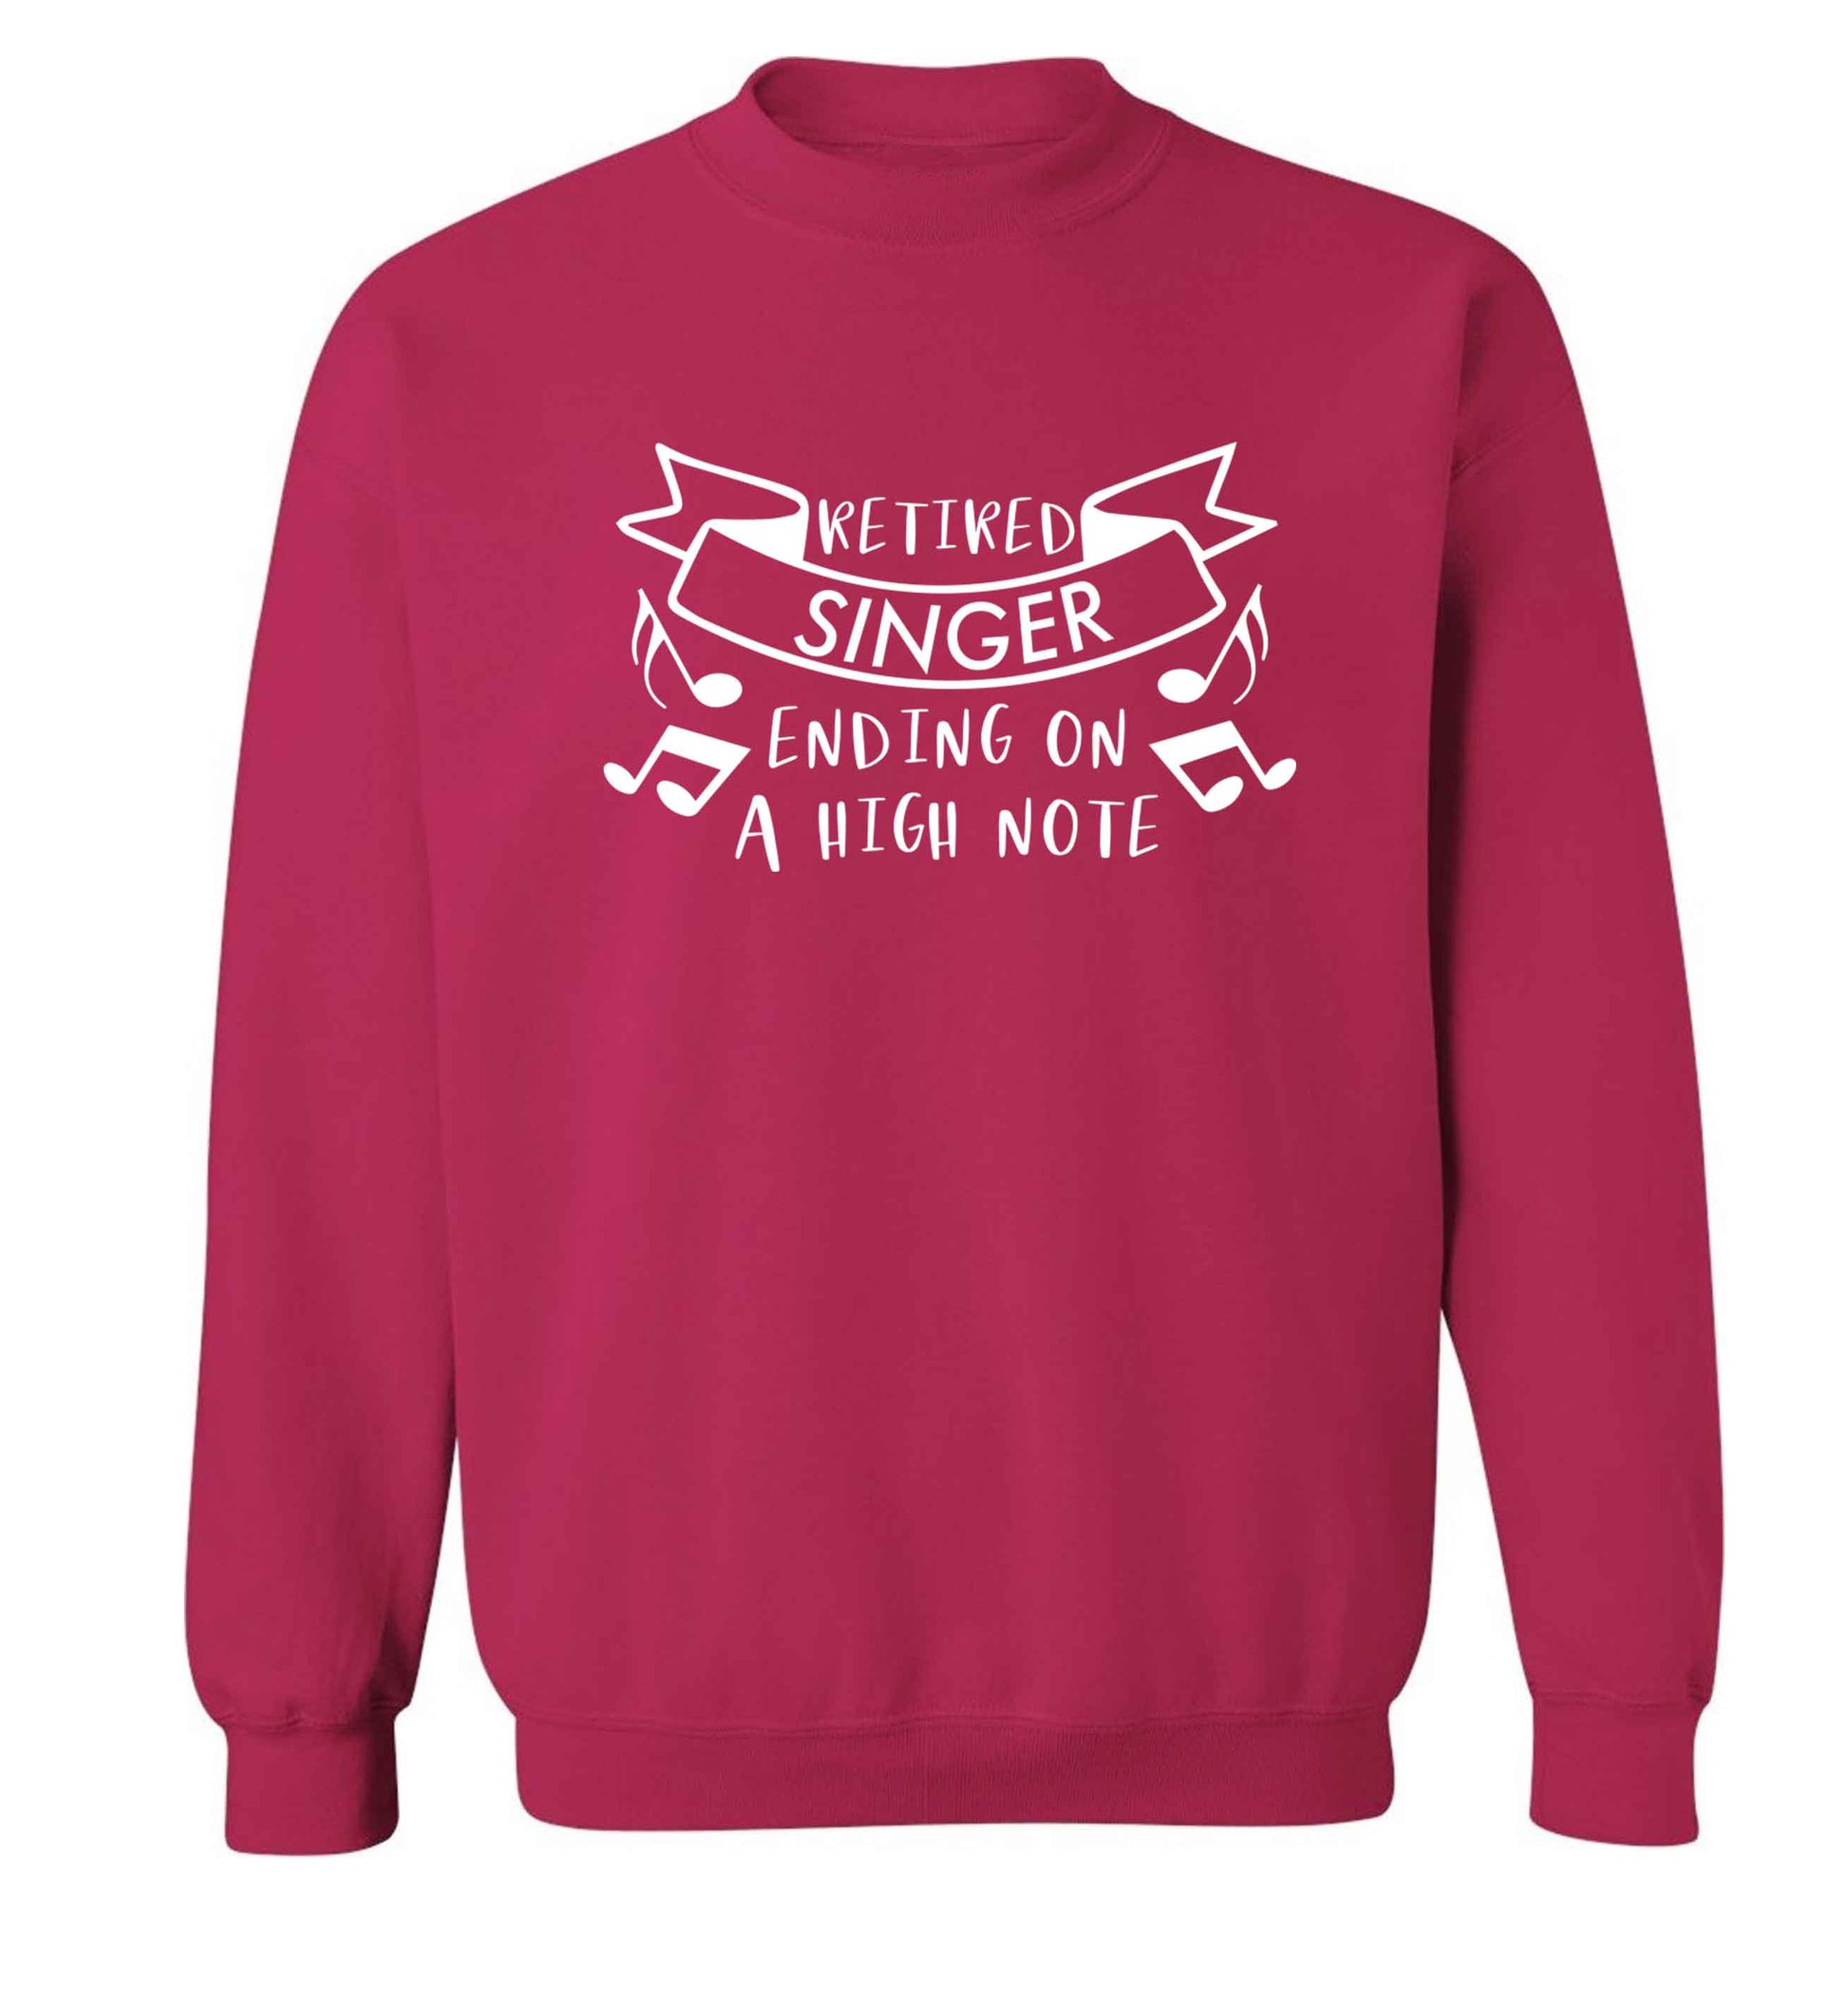 Retired singer ending on a high note Adult's unisex pink Sweater 2XL